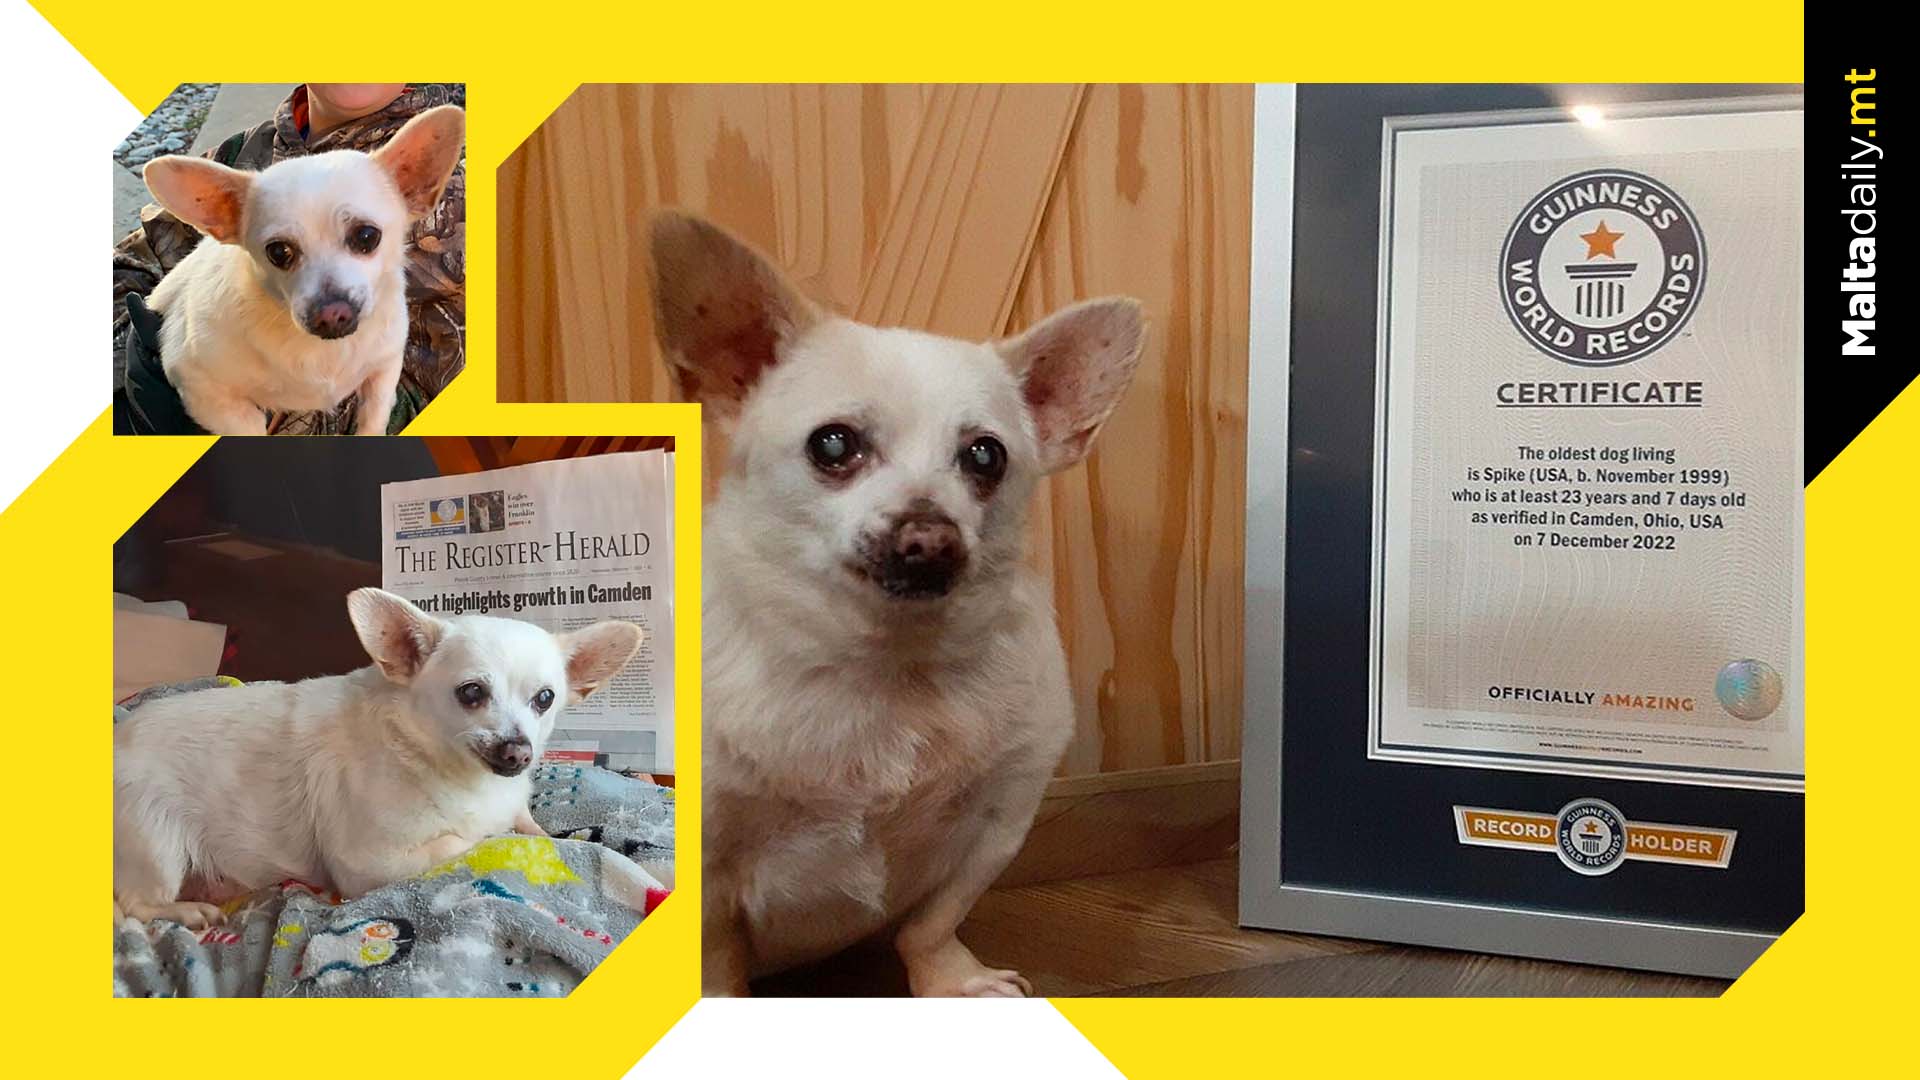 Spike is officially the world’s oldest living dog at 23